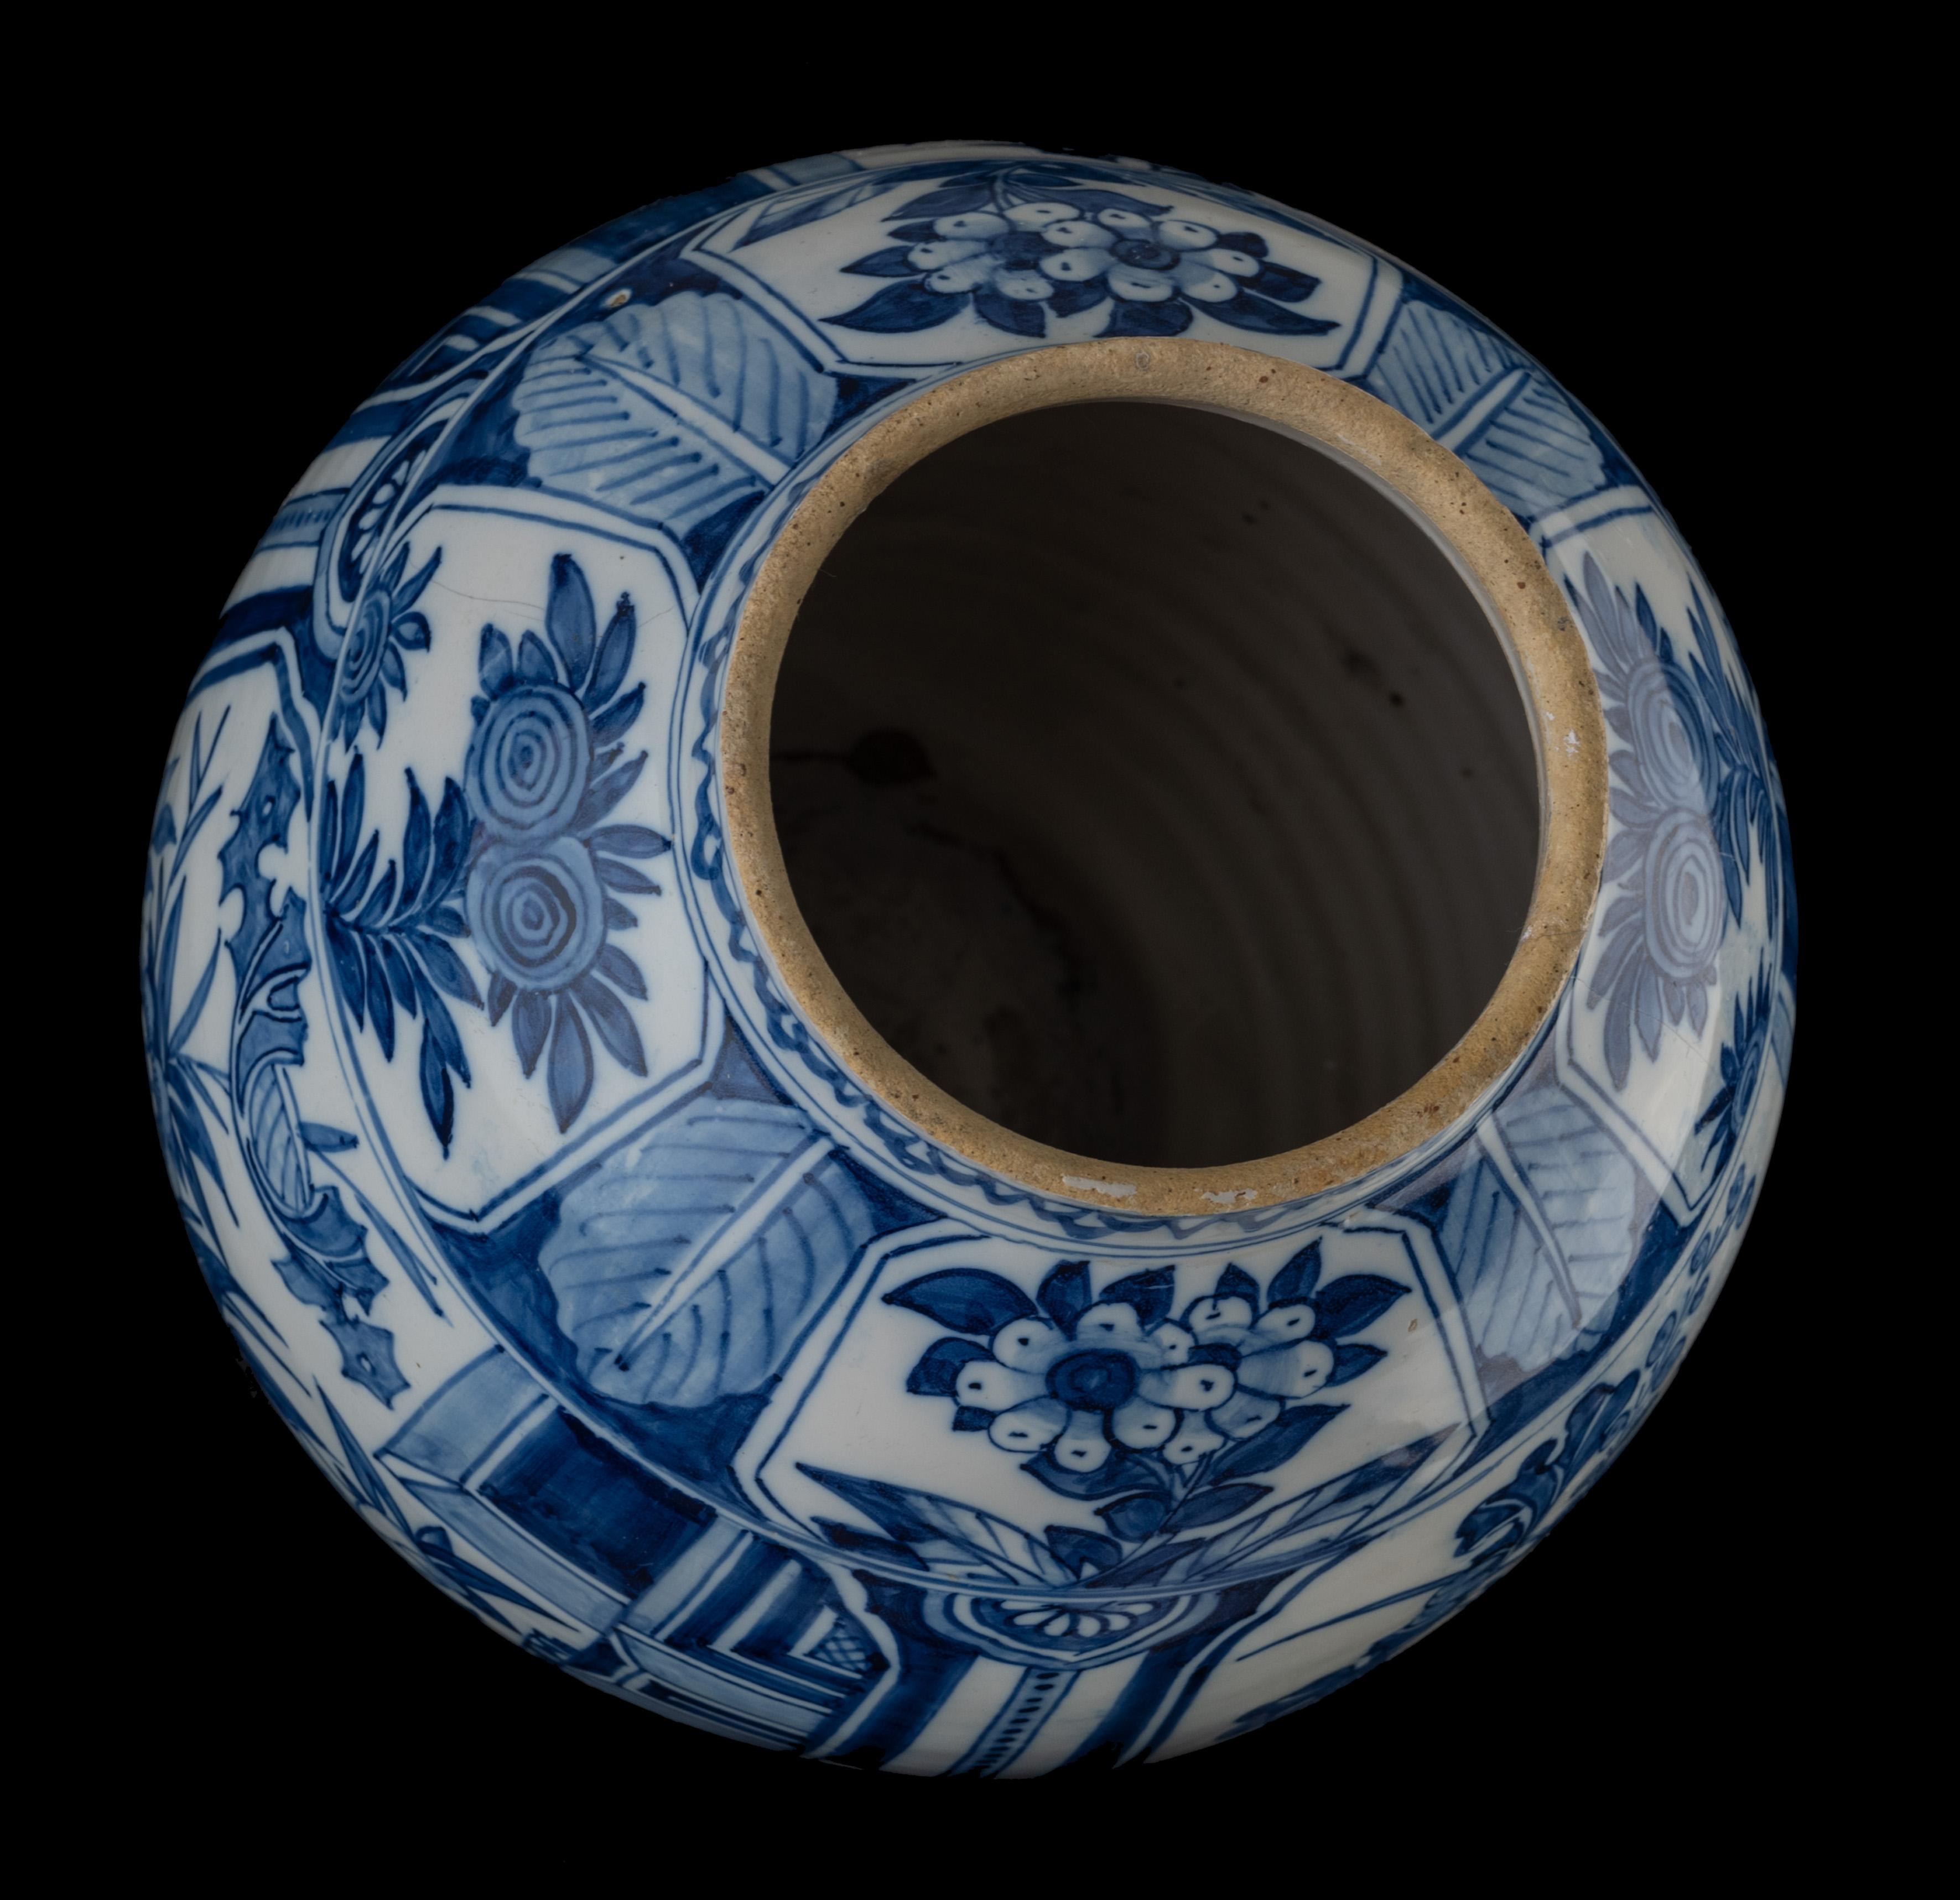 The ovoid jar stands on a slightly spreading foot, has a short upright neck, and is painted in blue with a floral decor. Three large cartouches containing flower bouquets have been applied to the belly, separated from each other by panels with